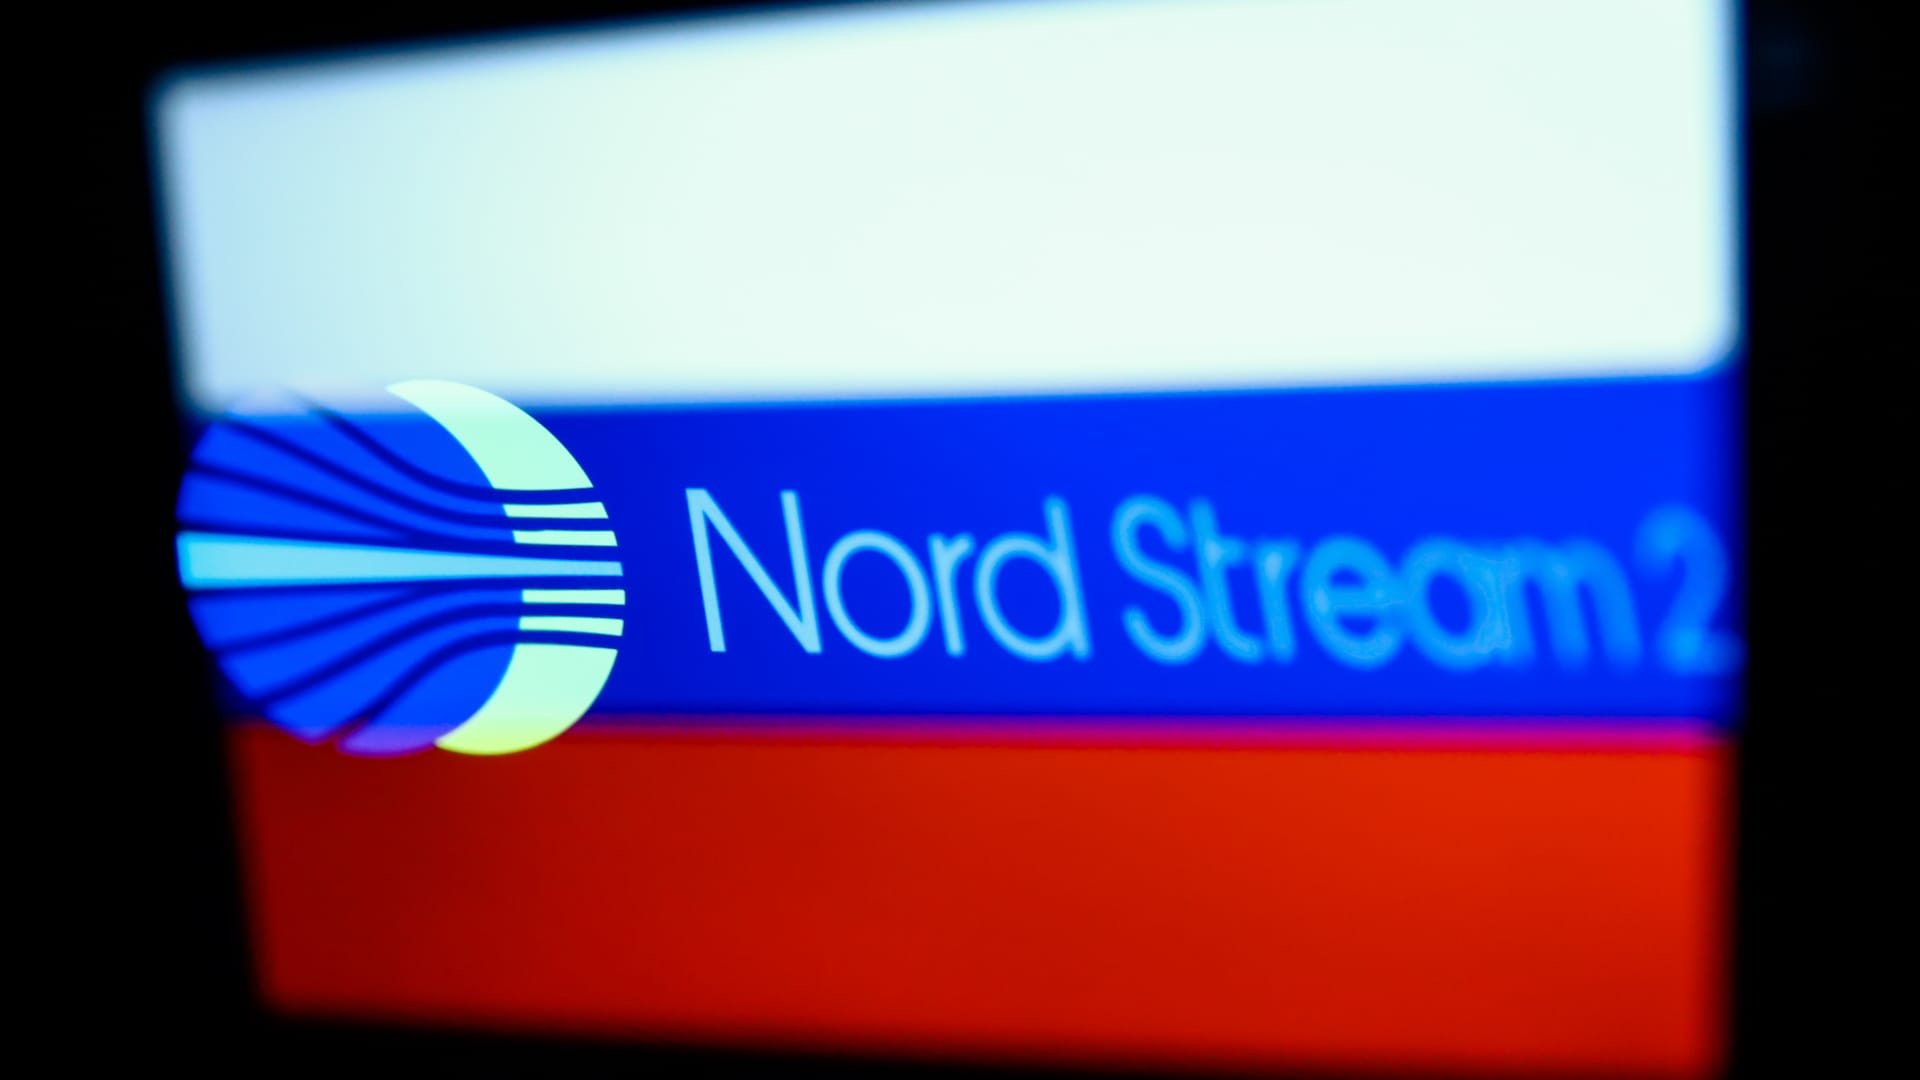 Nord Stream 2 logo displayed on a phone screen and Russian flag displayed on a laptop screen are seen in this multiple exposure illustration photo taken in Krakow in Krakow, Poland on February 22, 2022.